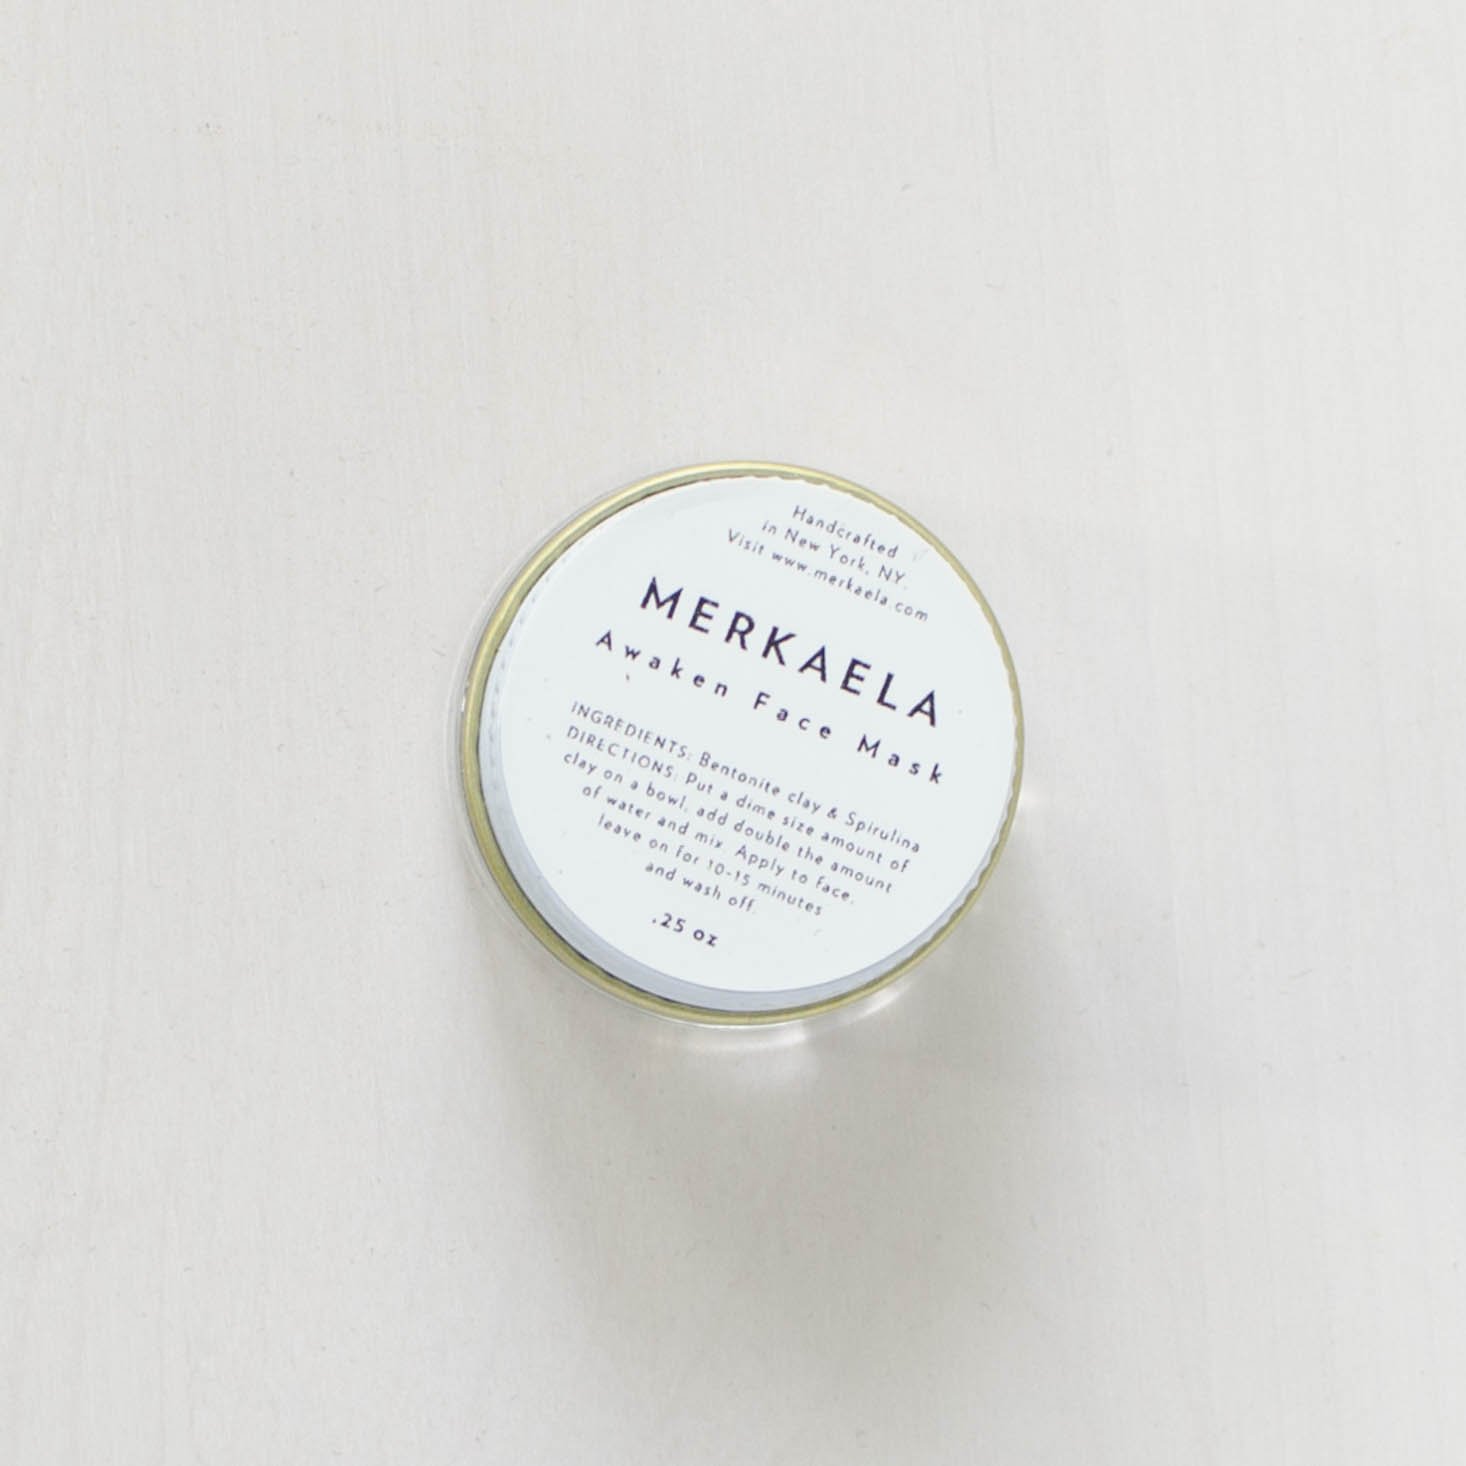 See the wellness items inside Merkaela's Fall box. Read our review!